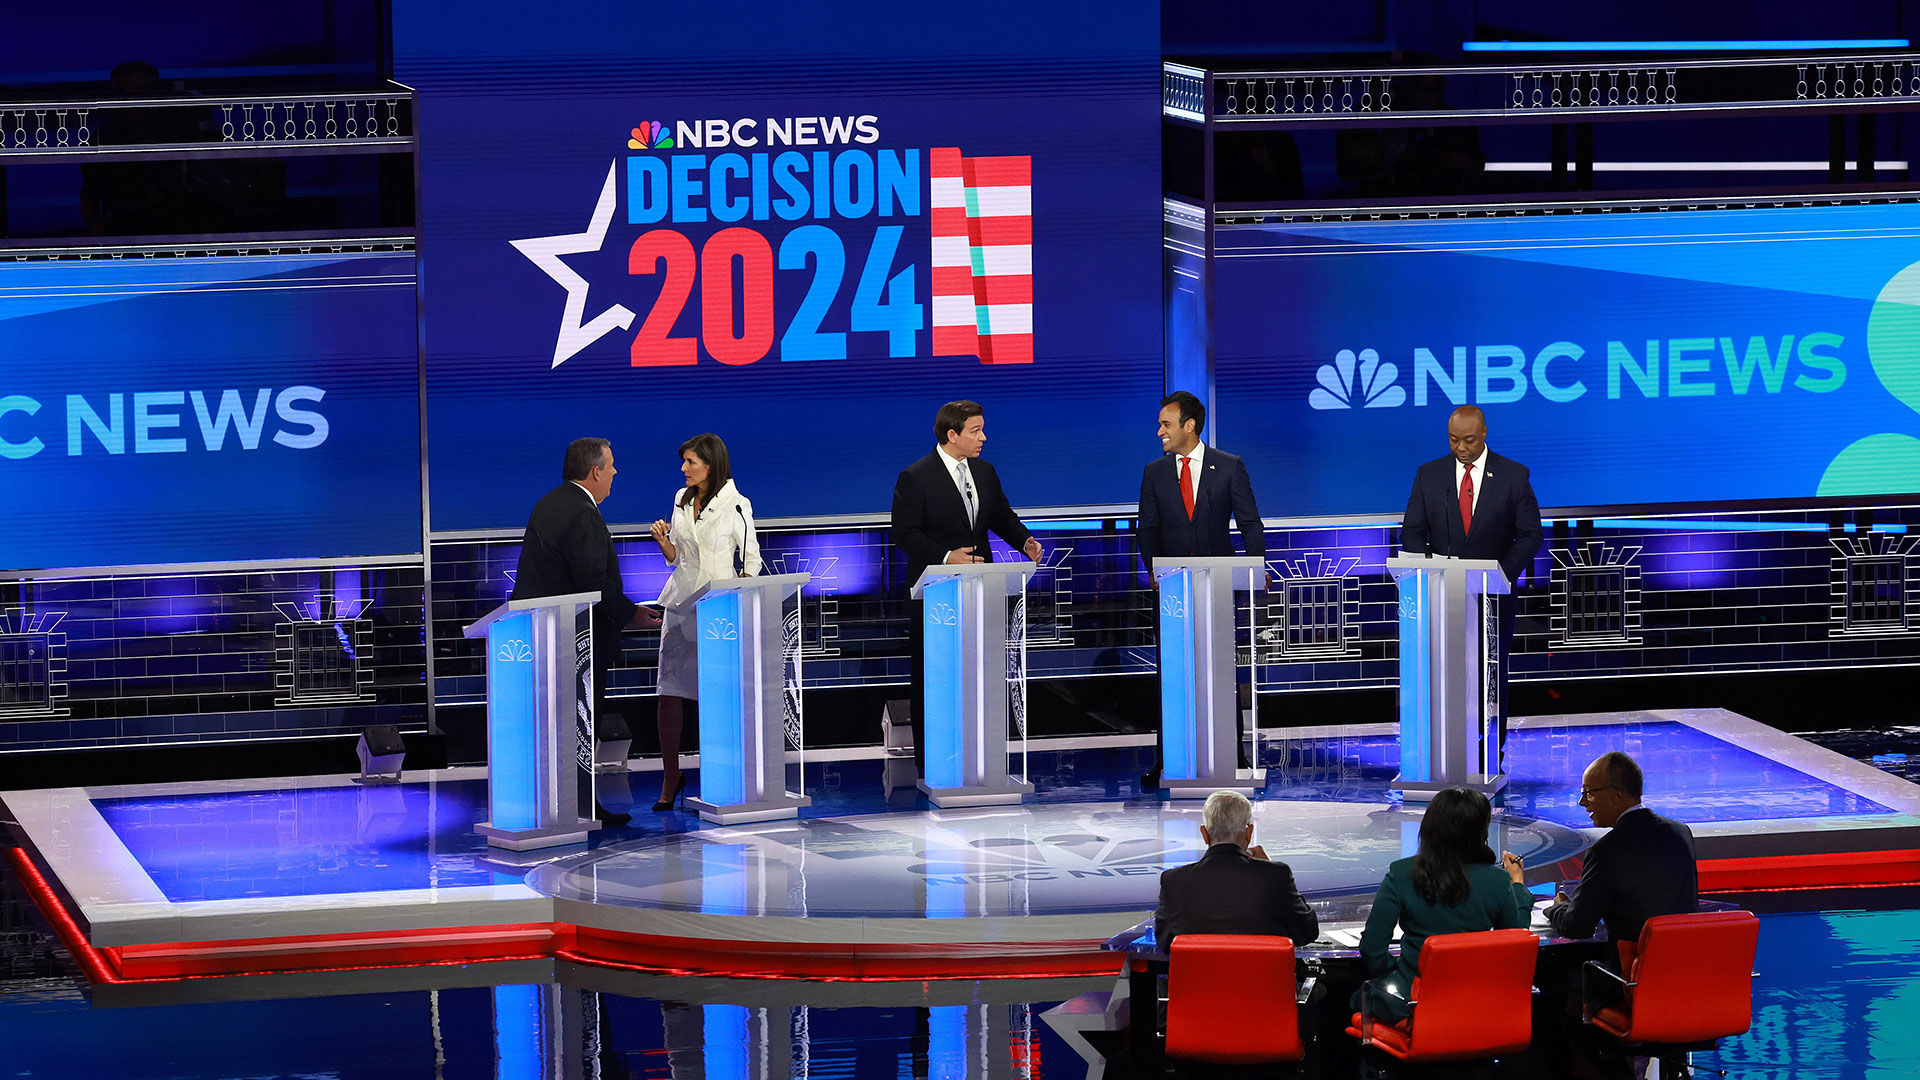 It says 'NBC News: Decision 2024,'
the word 'decision' and the '24' are in blue, the '20' is in red.